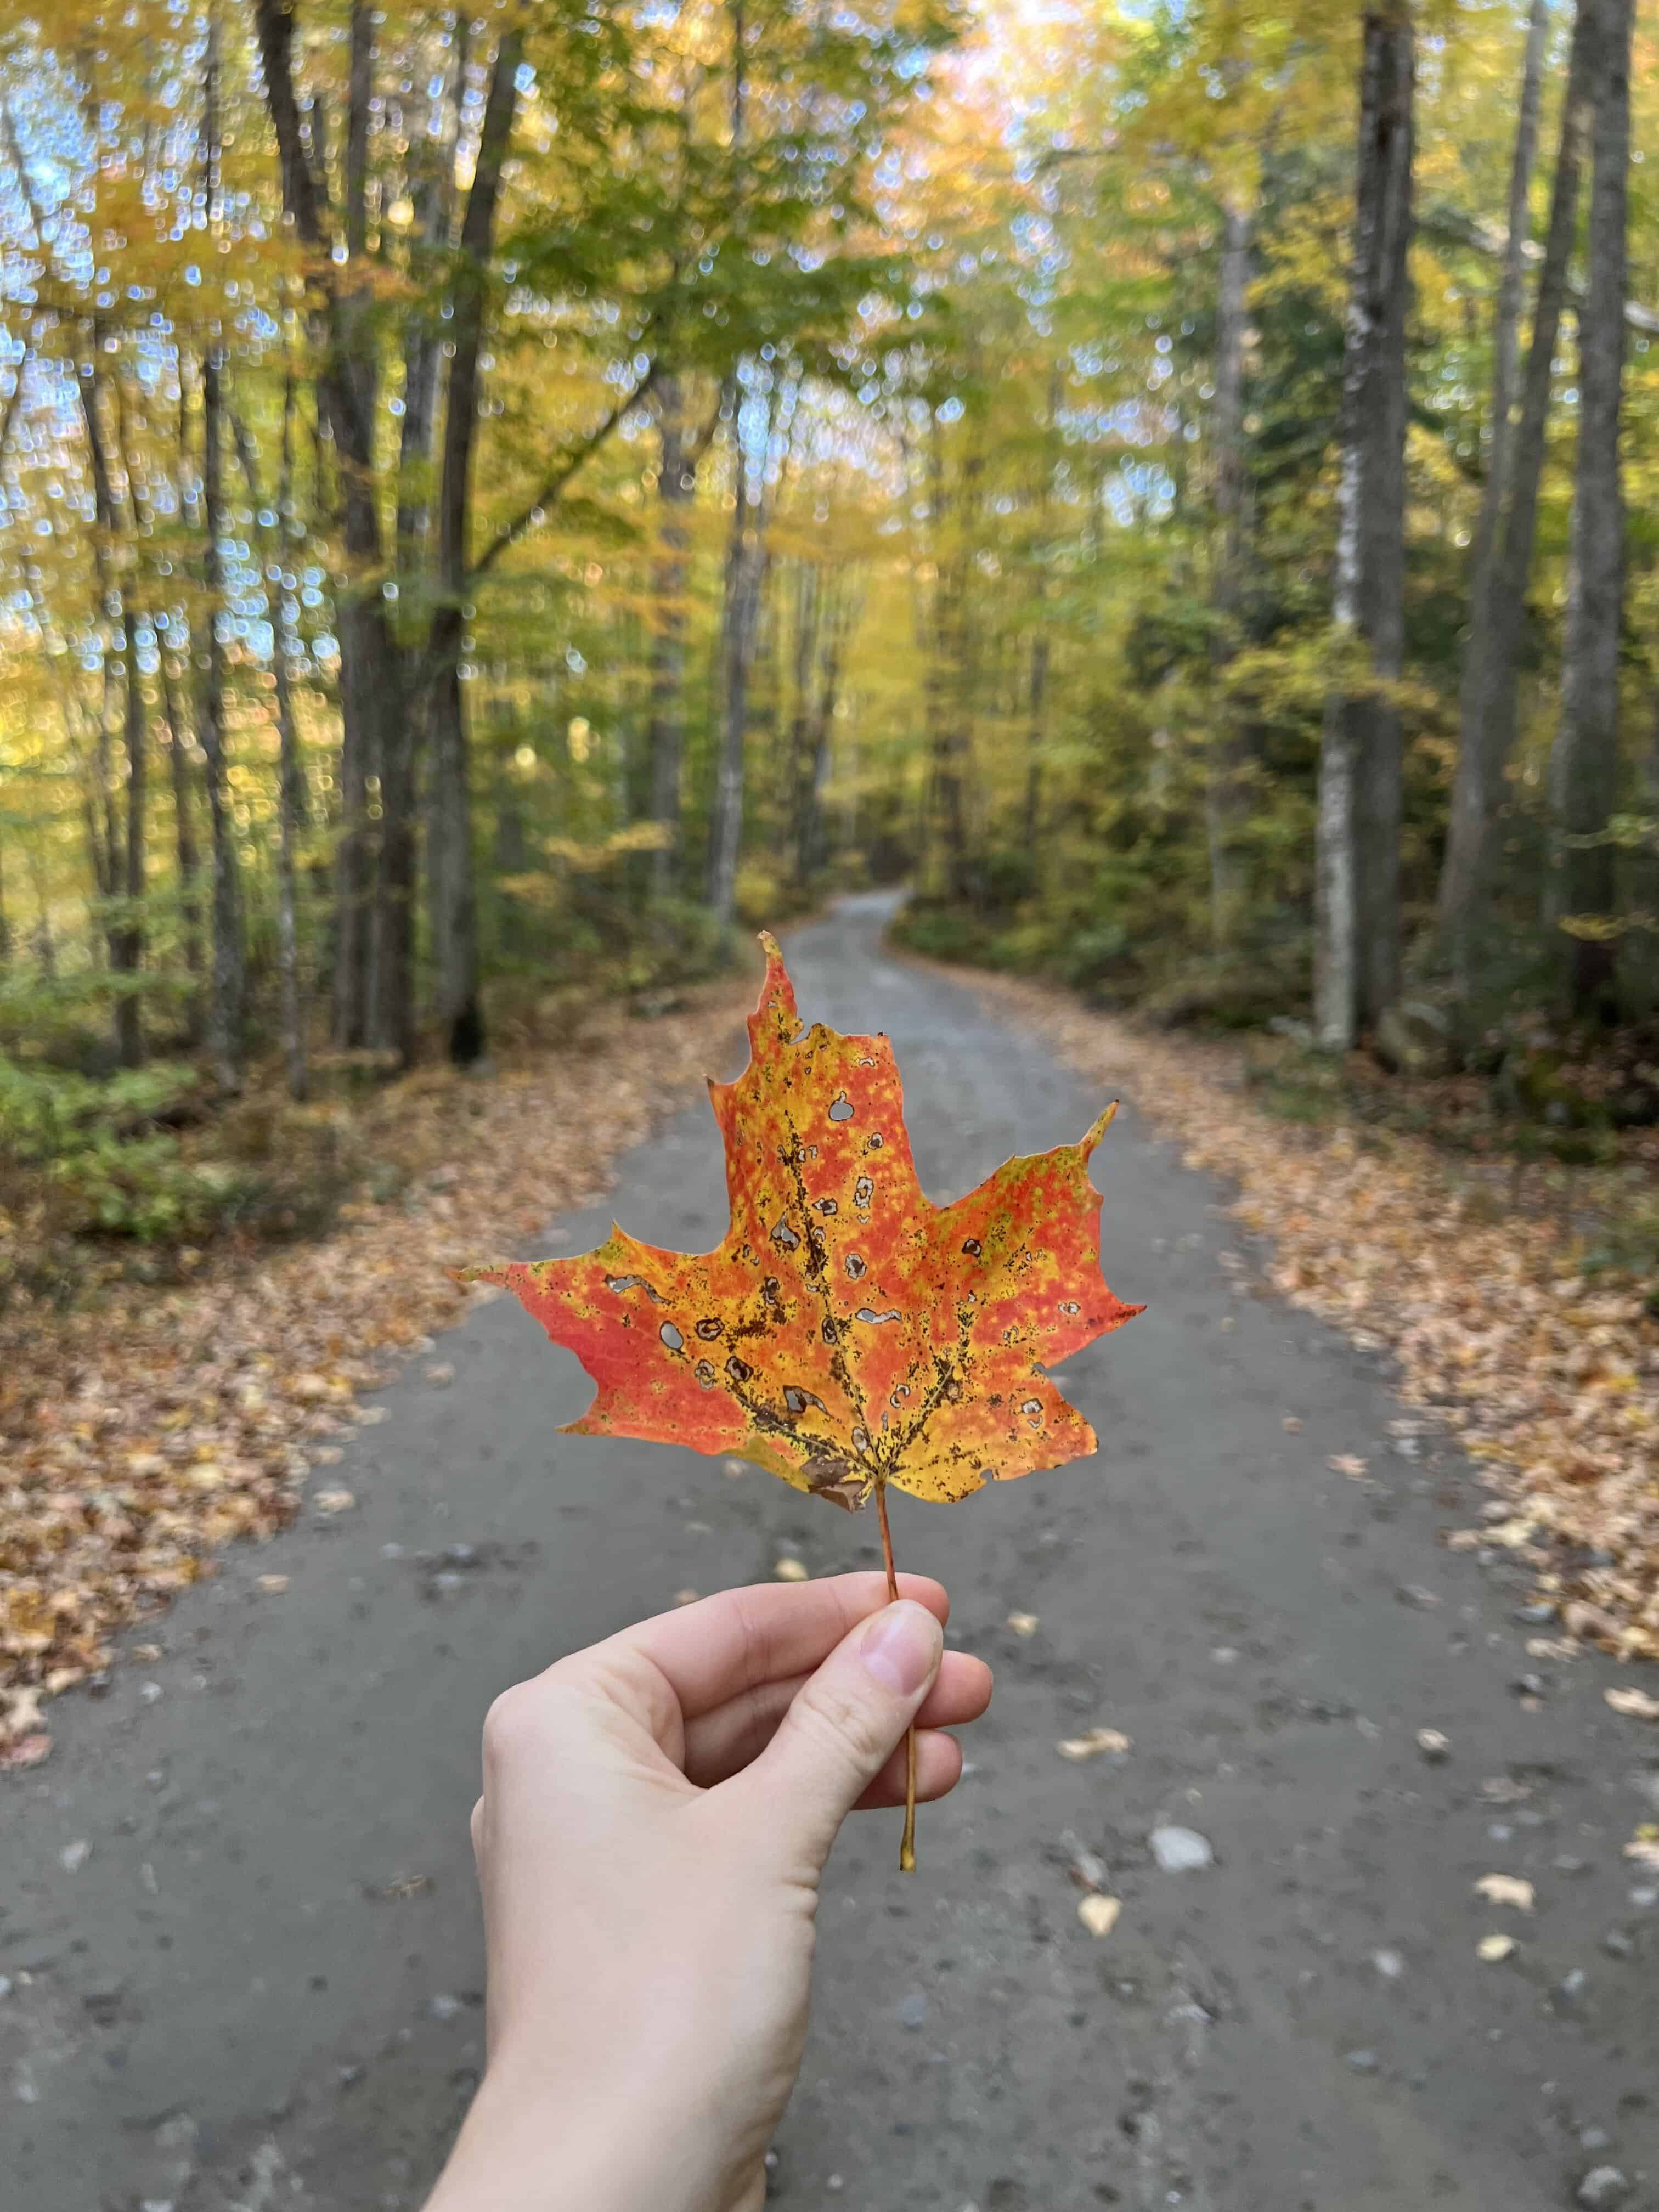 A hand holding a single maple leaf with splotches of orange and yellow, with a soft-focus background of a peaceful forest path in New England, a prime place to visit in the fall